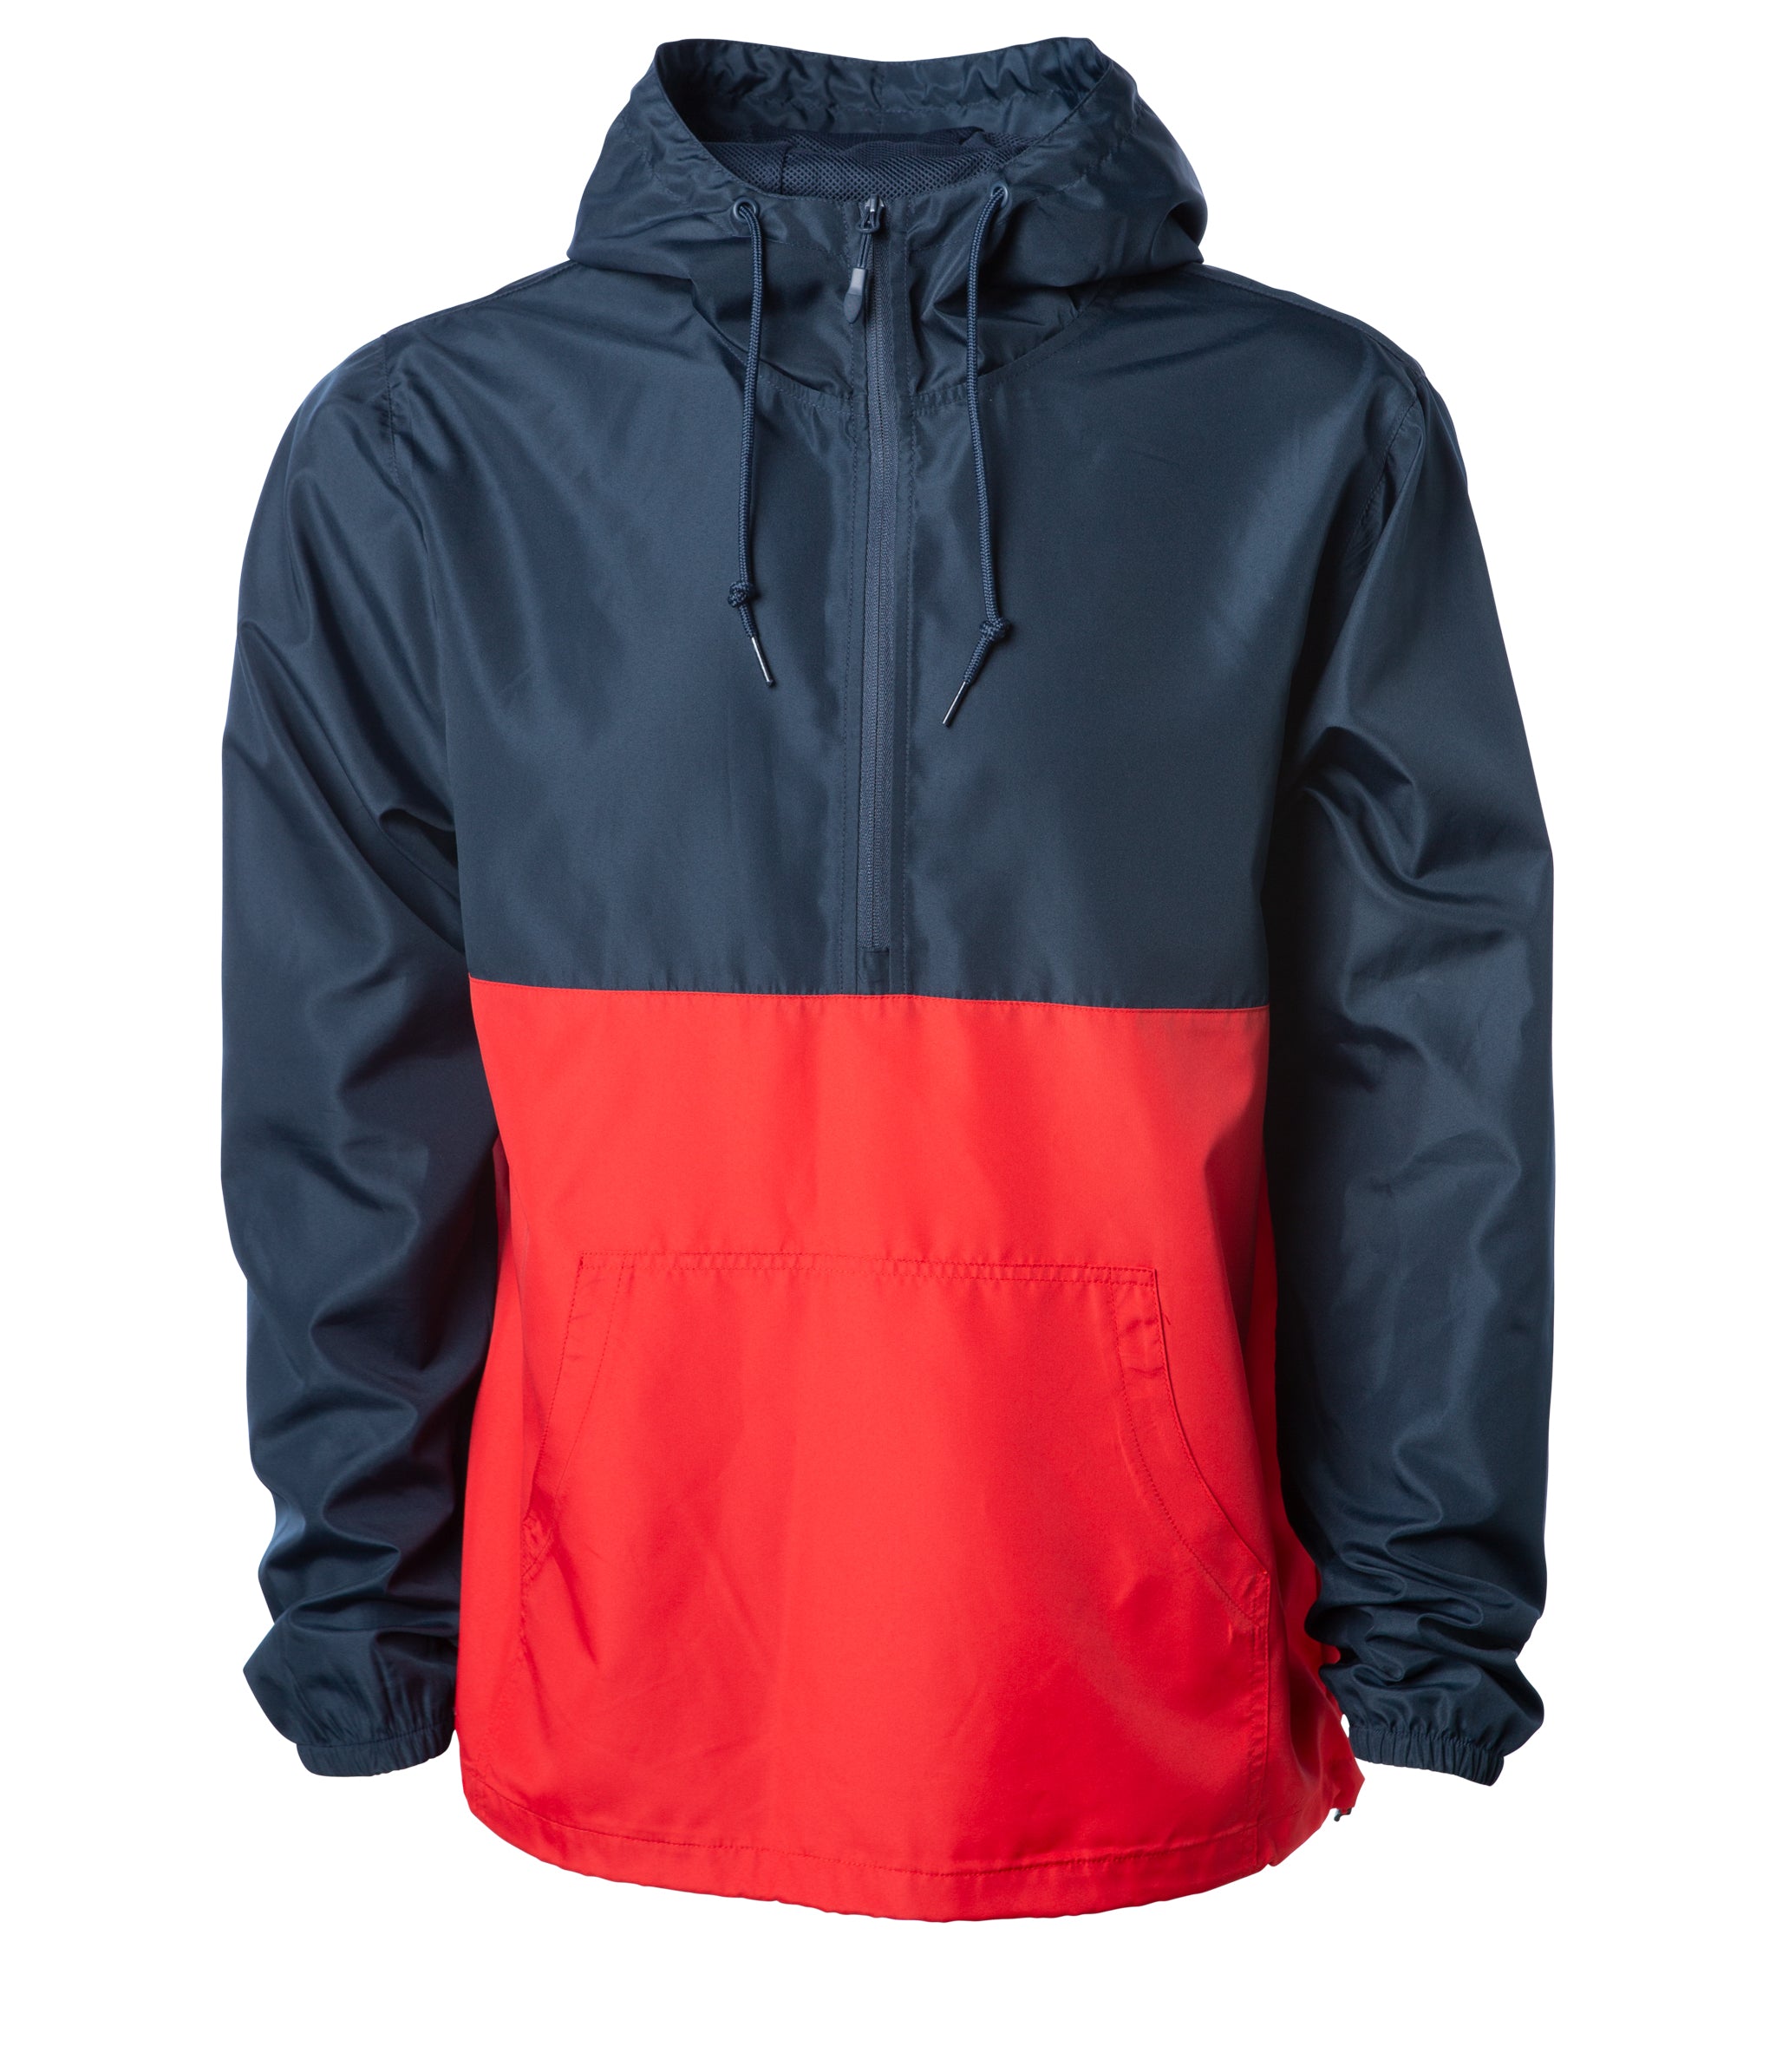 Modstand Imperialisme fire gange Pullover Windbreaker Anorak Jacket | Independent Trading Co. - Independent  Trading Company